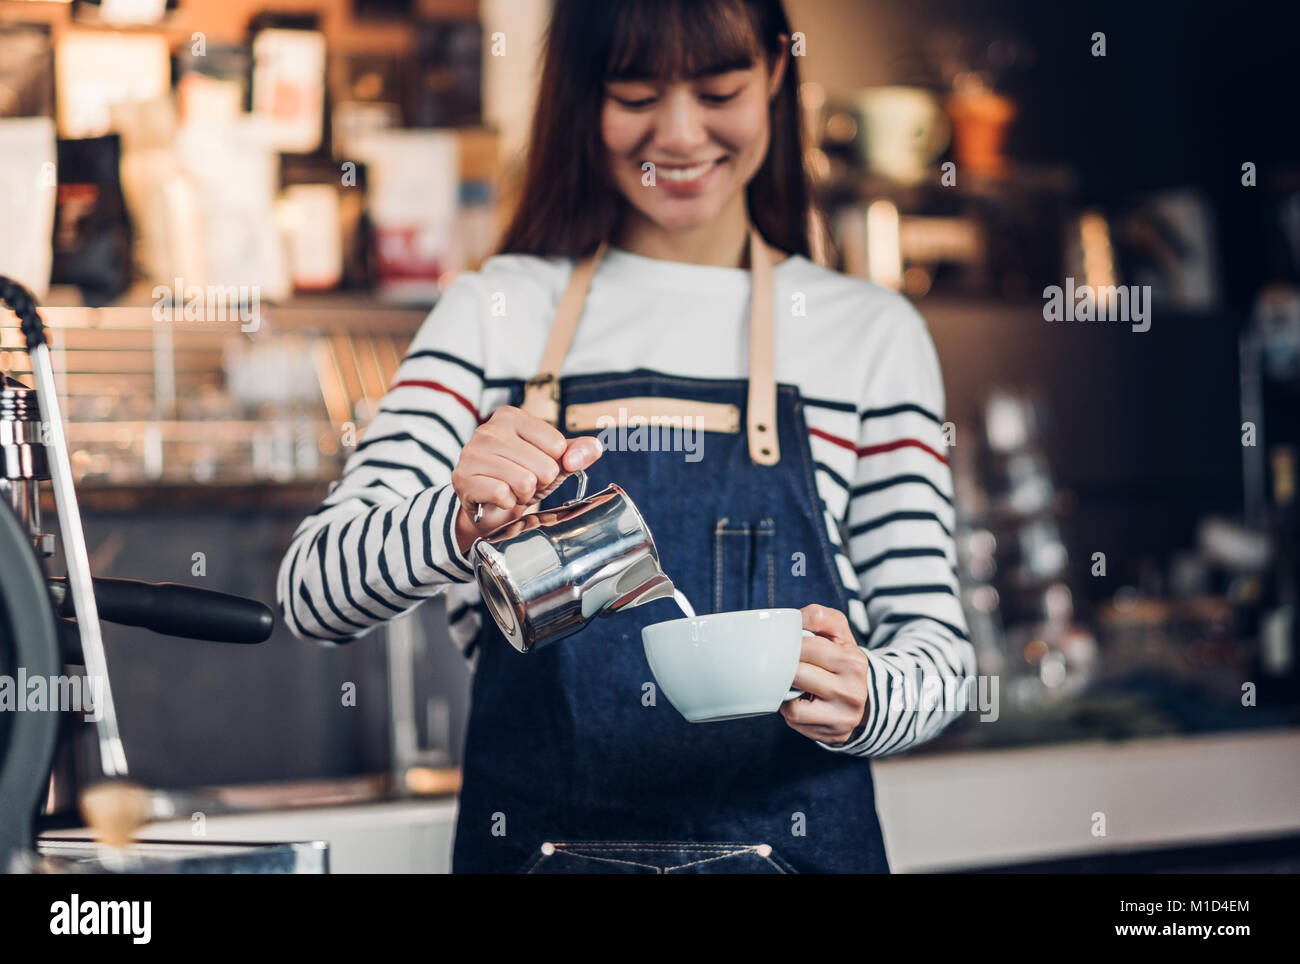 Asia woman barista pour milk into hot coffee cup at counter bar in front of machine in cafe restaurant,Food business owner concept Stock Photo